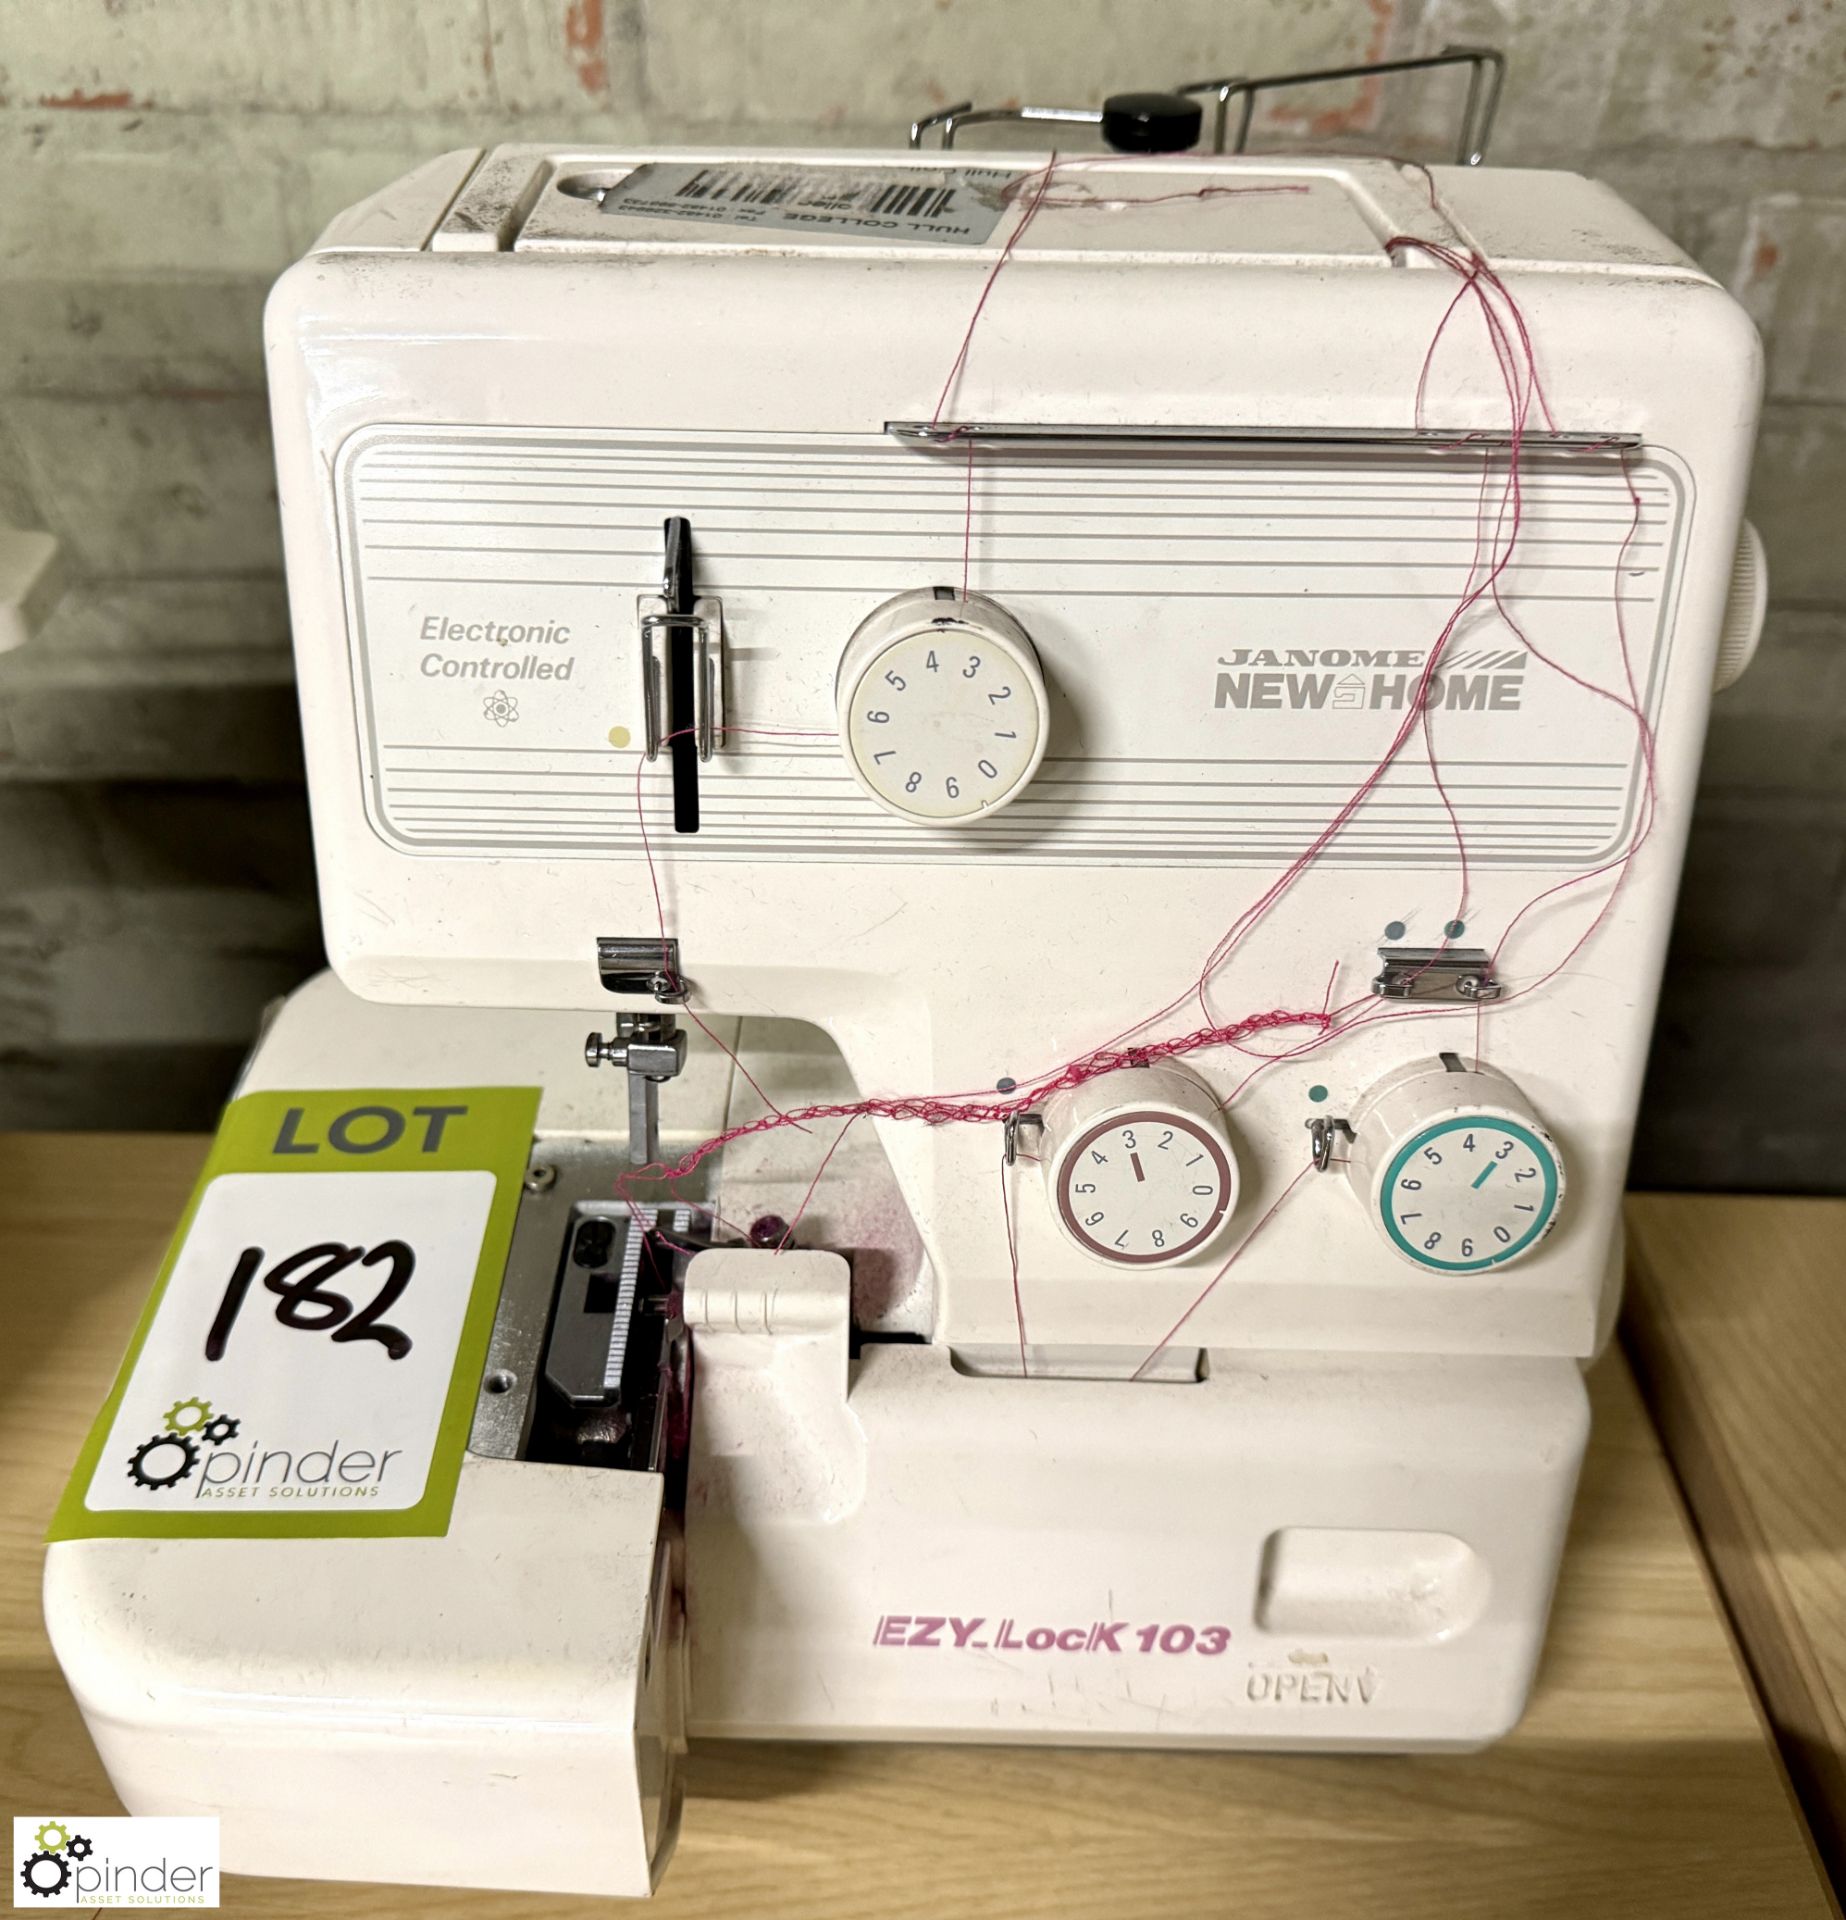 2 Janome New Home EZY.Lock 103 Domestic 3-thread Overlockers, 240volts (no power leads or foot - Image 3 of 4